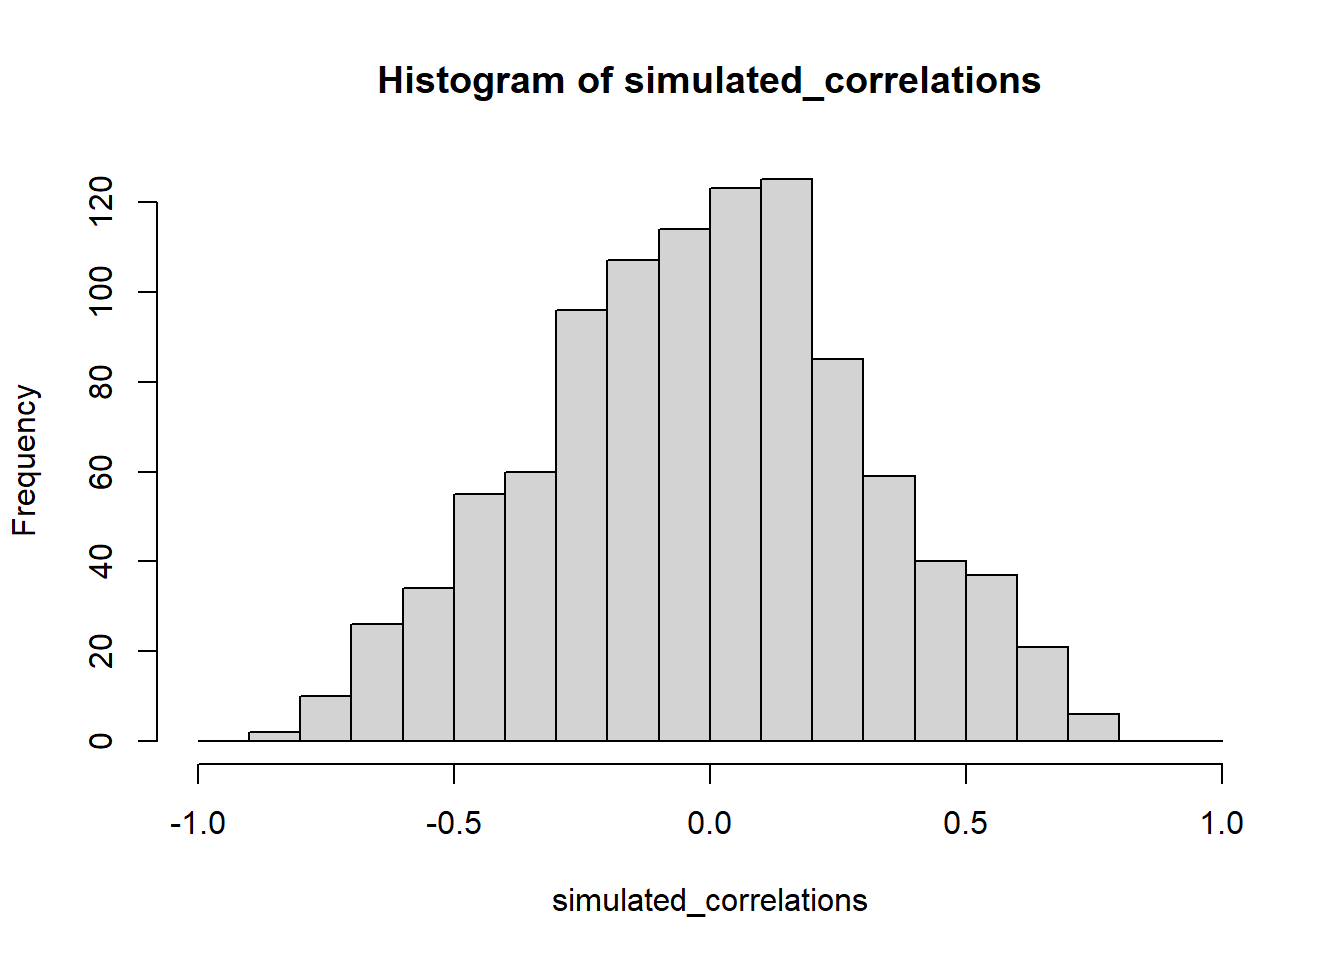 A histogram showing the frequency distribution of r-values for completely random values between an X and Y variable (sample-size=10). A rull range of r-values can be obtained by chance alone. Larger r-values are less common than smaller r-values